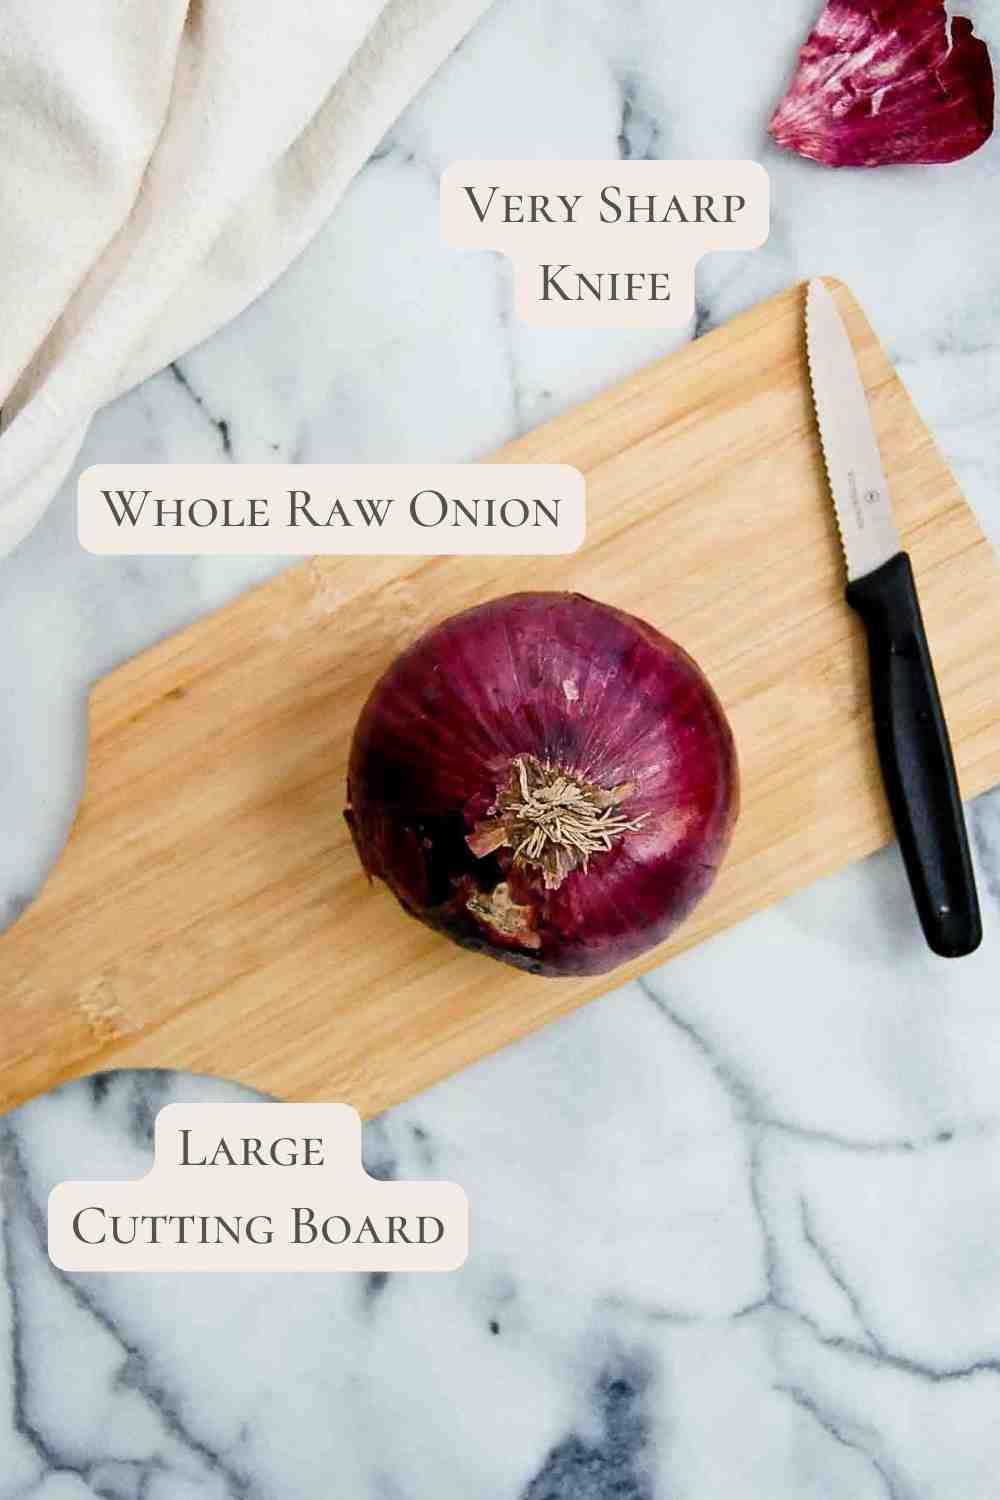 large onion, knife, and cutting board on counterboard.